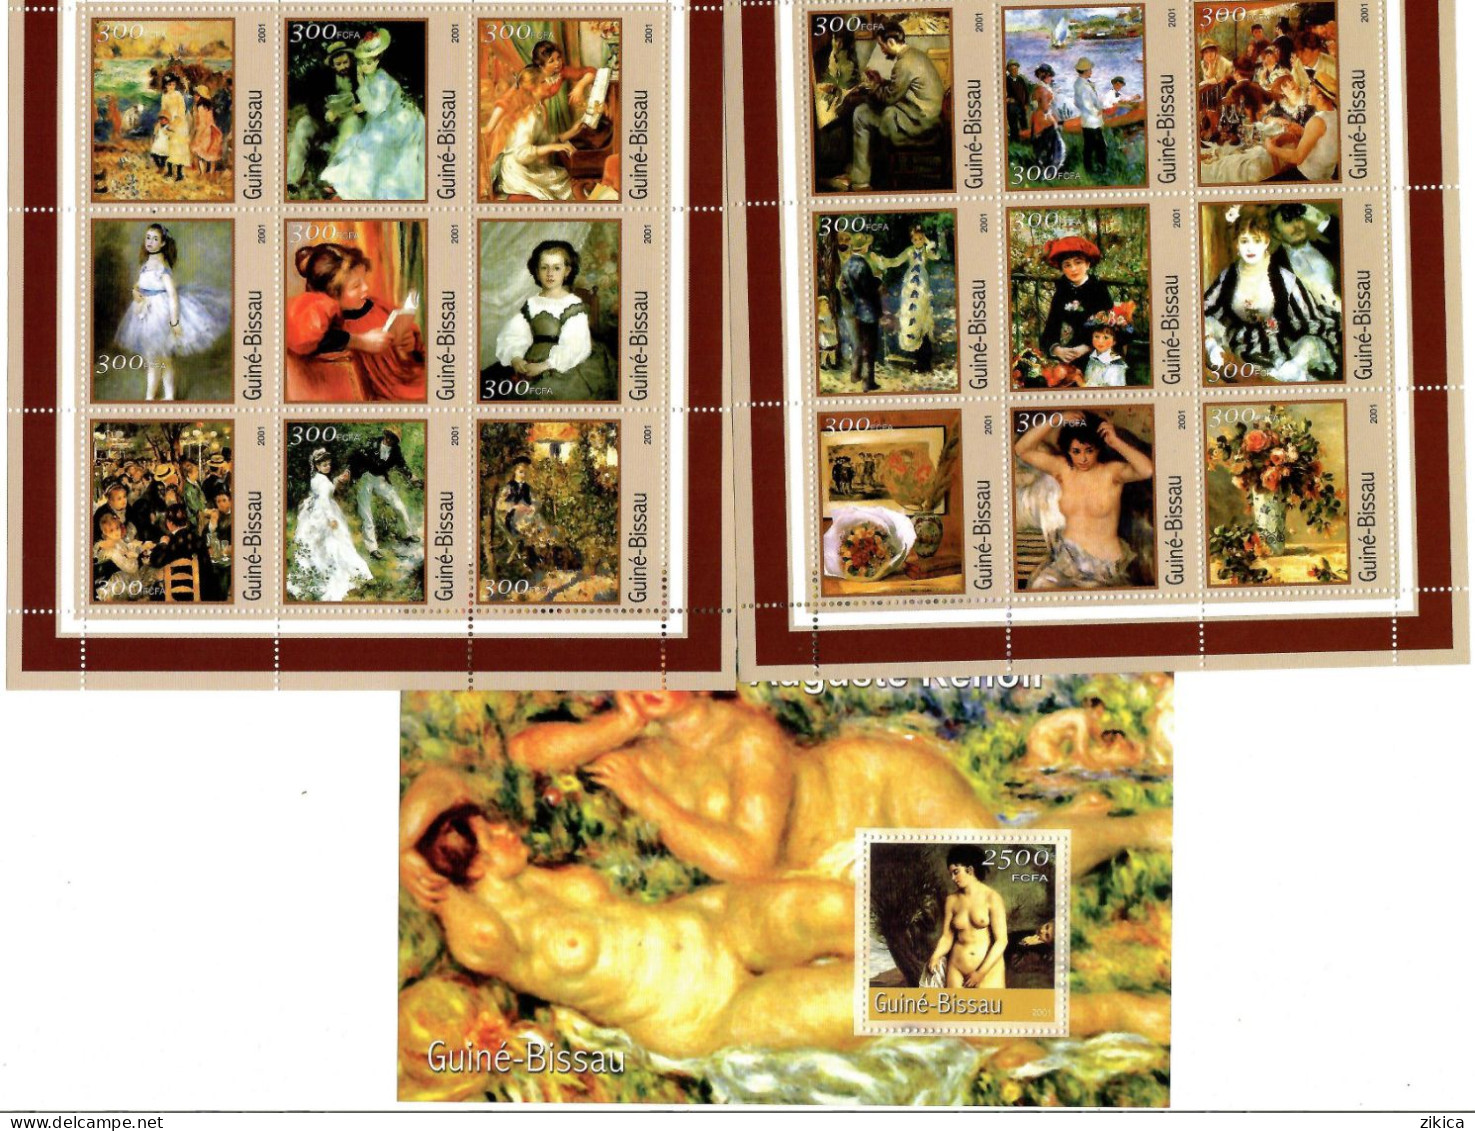 Guinea-Bissau 2001 - 2001 Paintings,Pierre-Auguste Renoir French Artist,France,2 M/S And S/S. MNH** - Guinea-Bissau